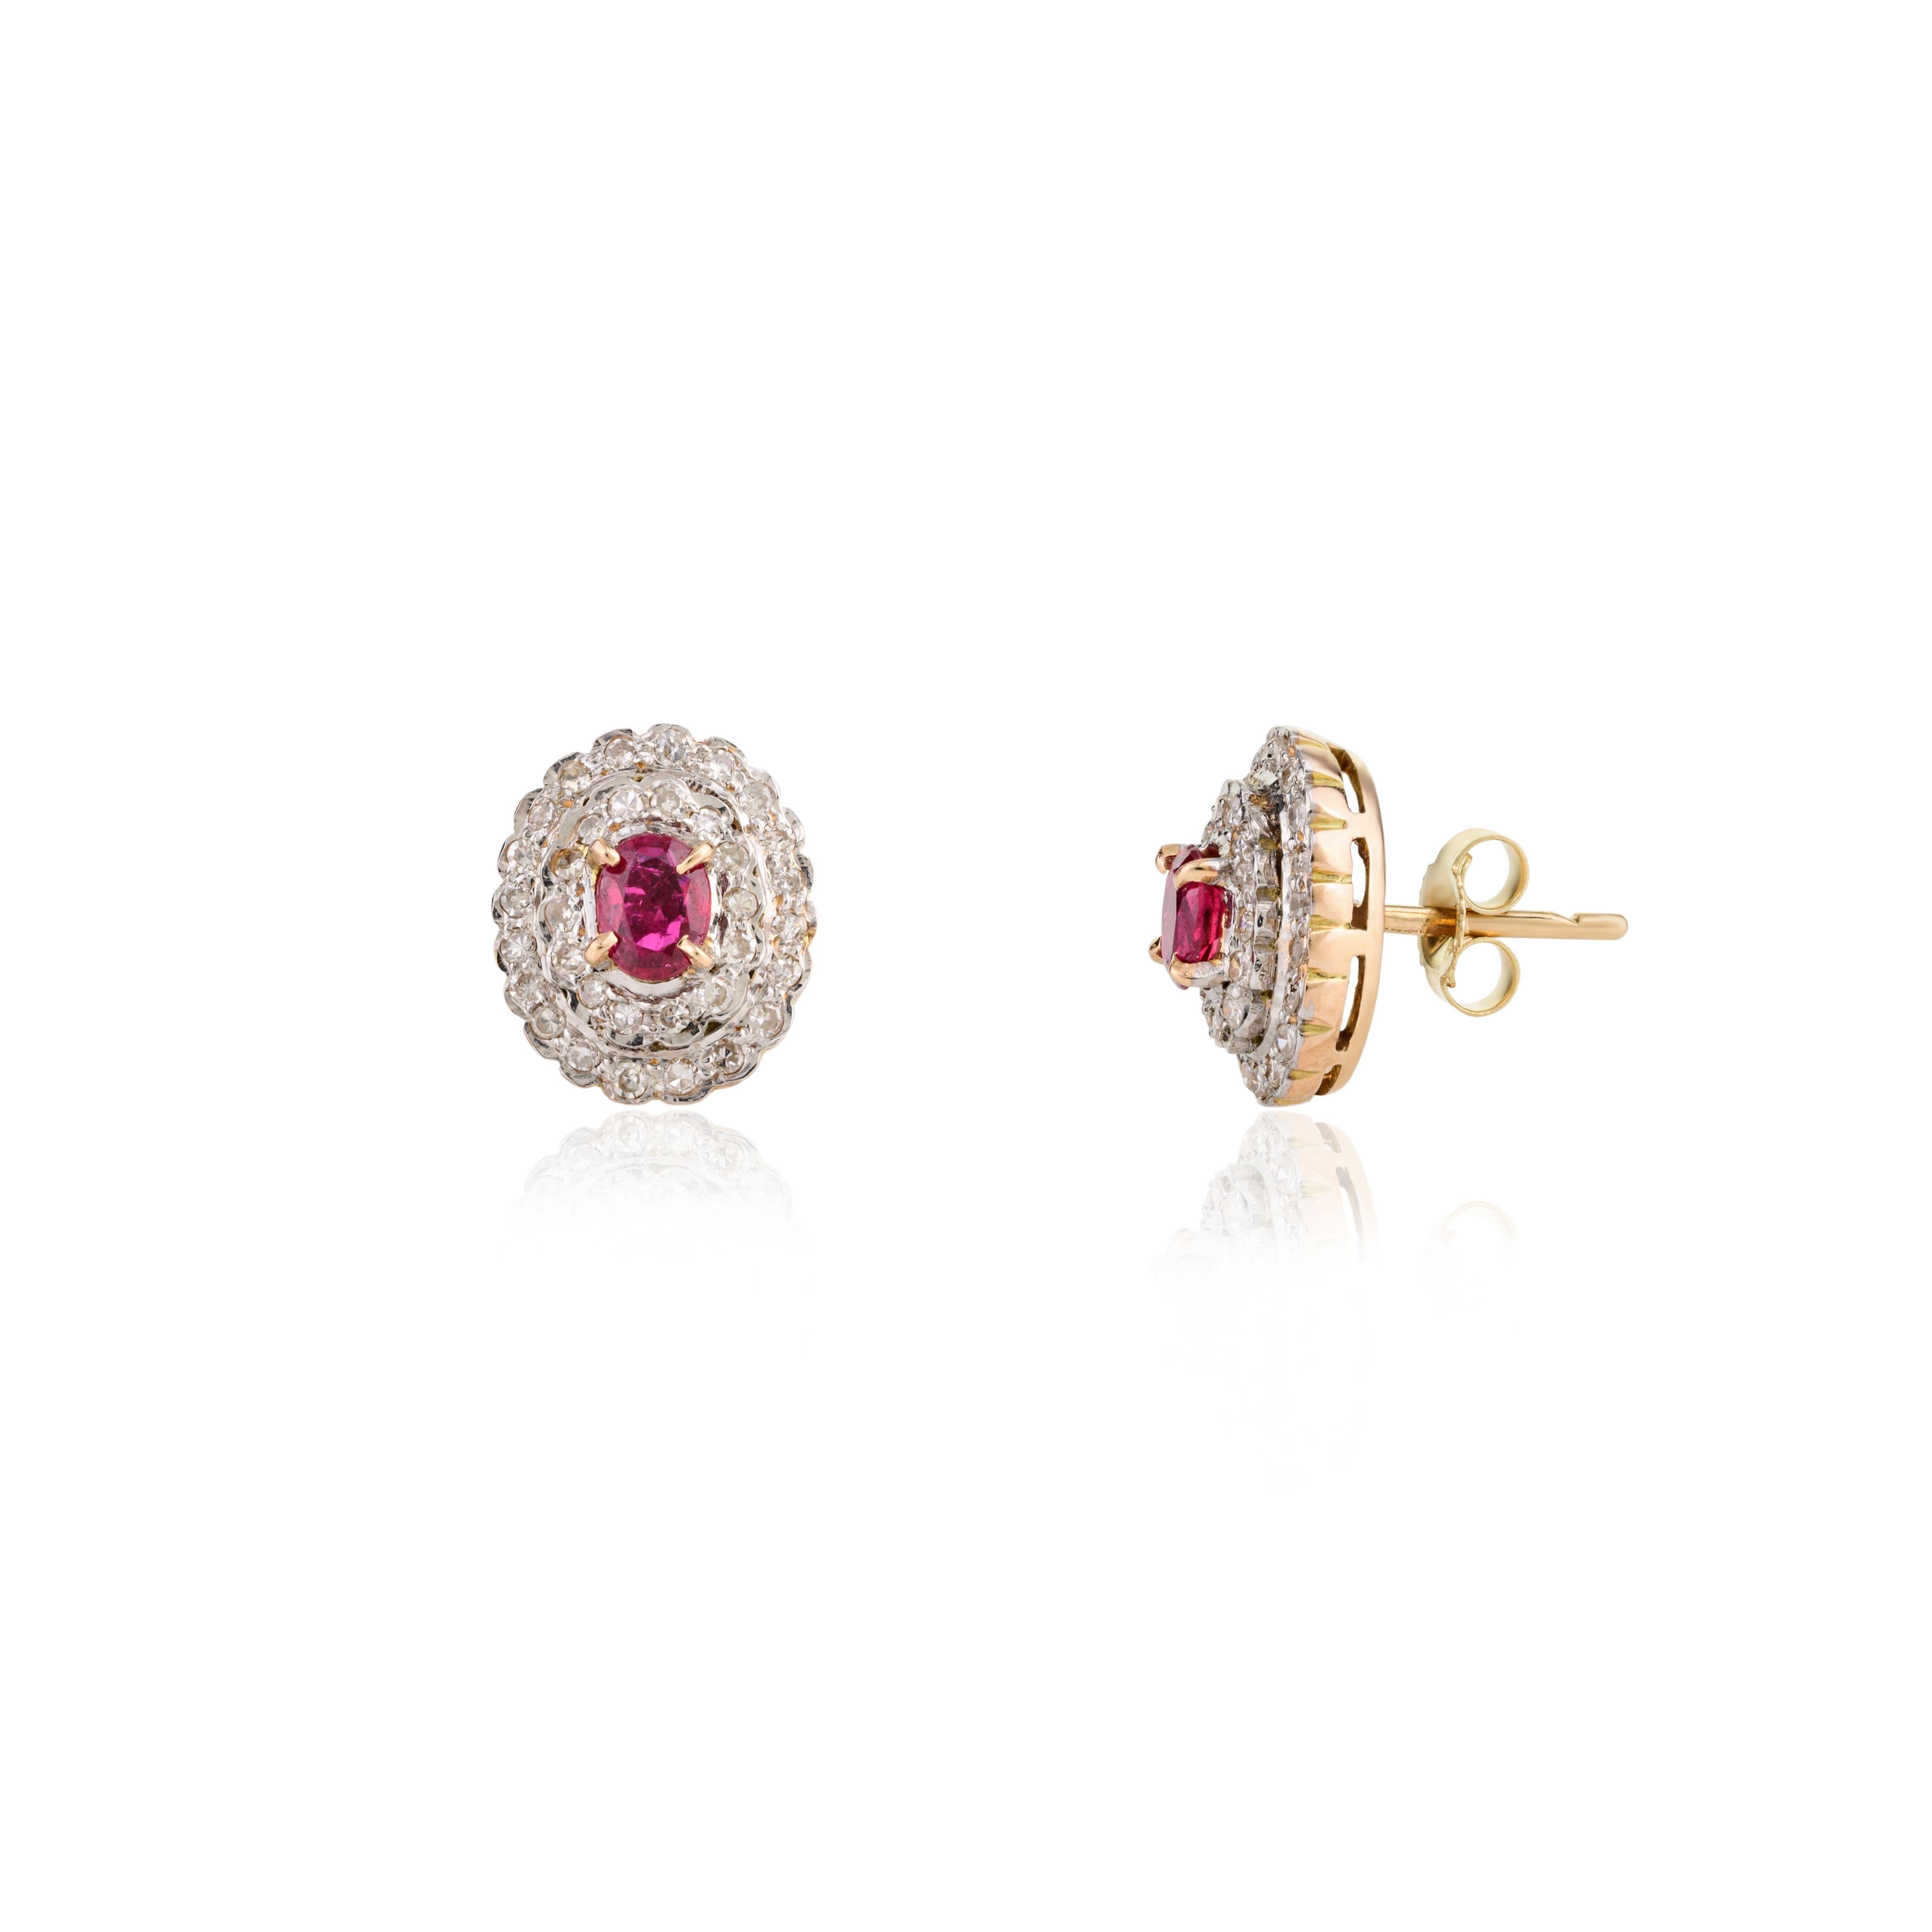 Certified Genuine Ruby and Halo Diamond Wedding Stud Earrings in 14k Yellow Gold In New Condition For Sale In Houston, TX